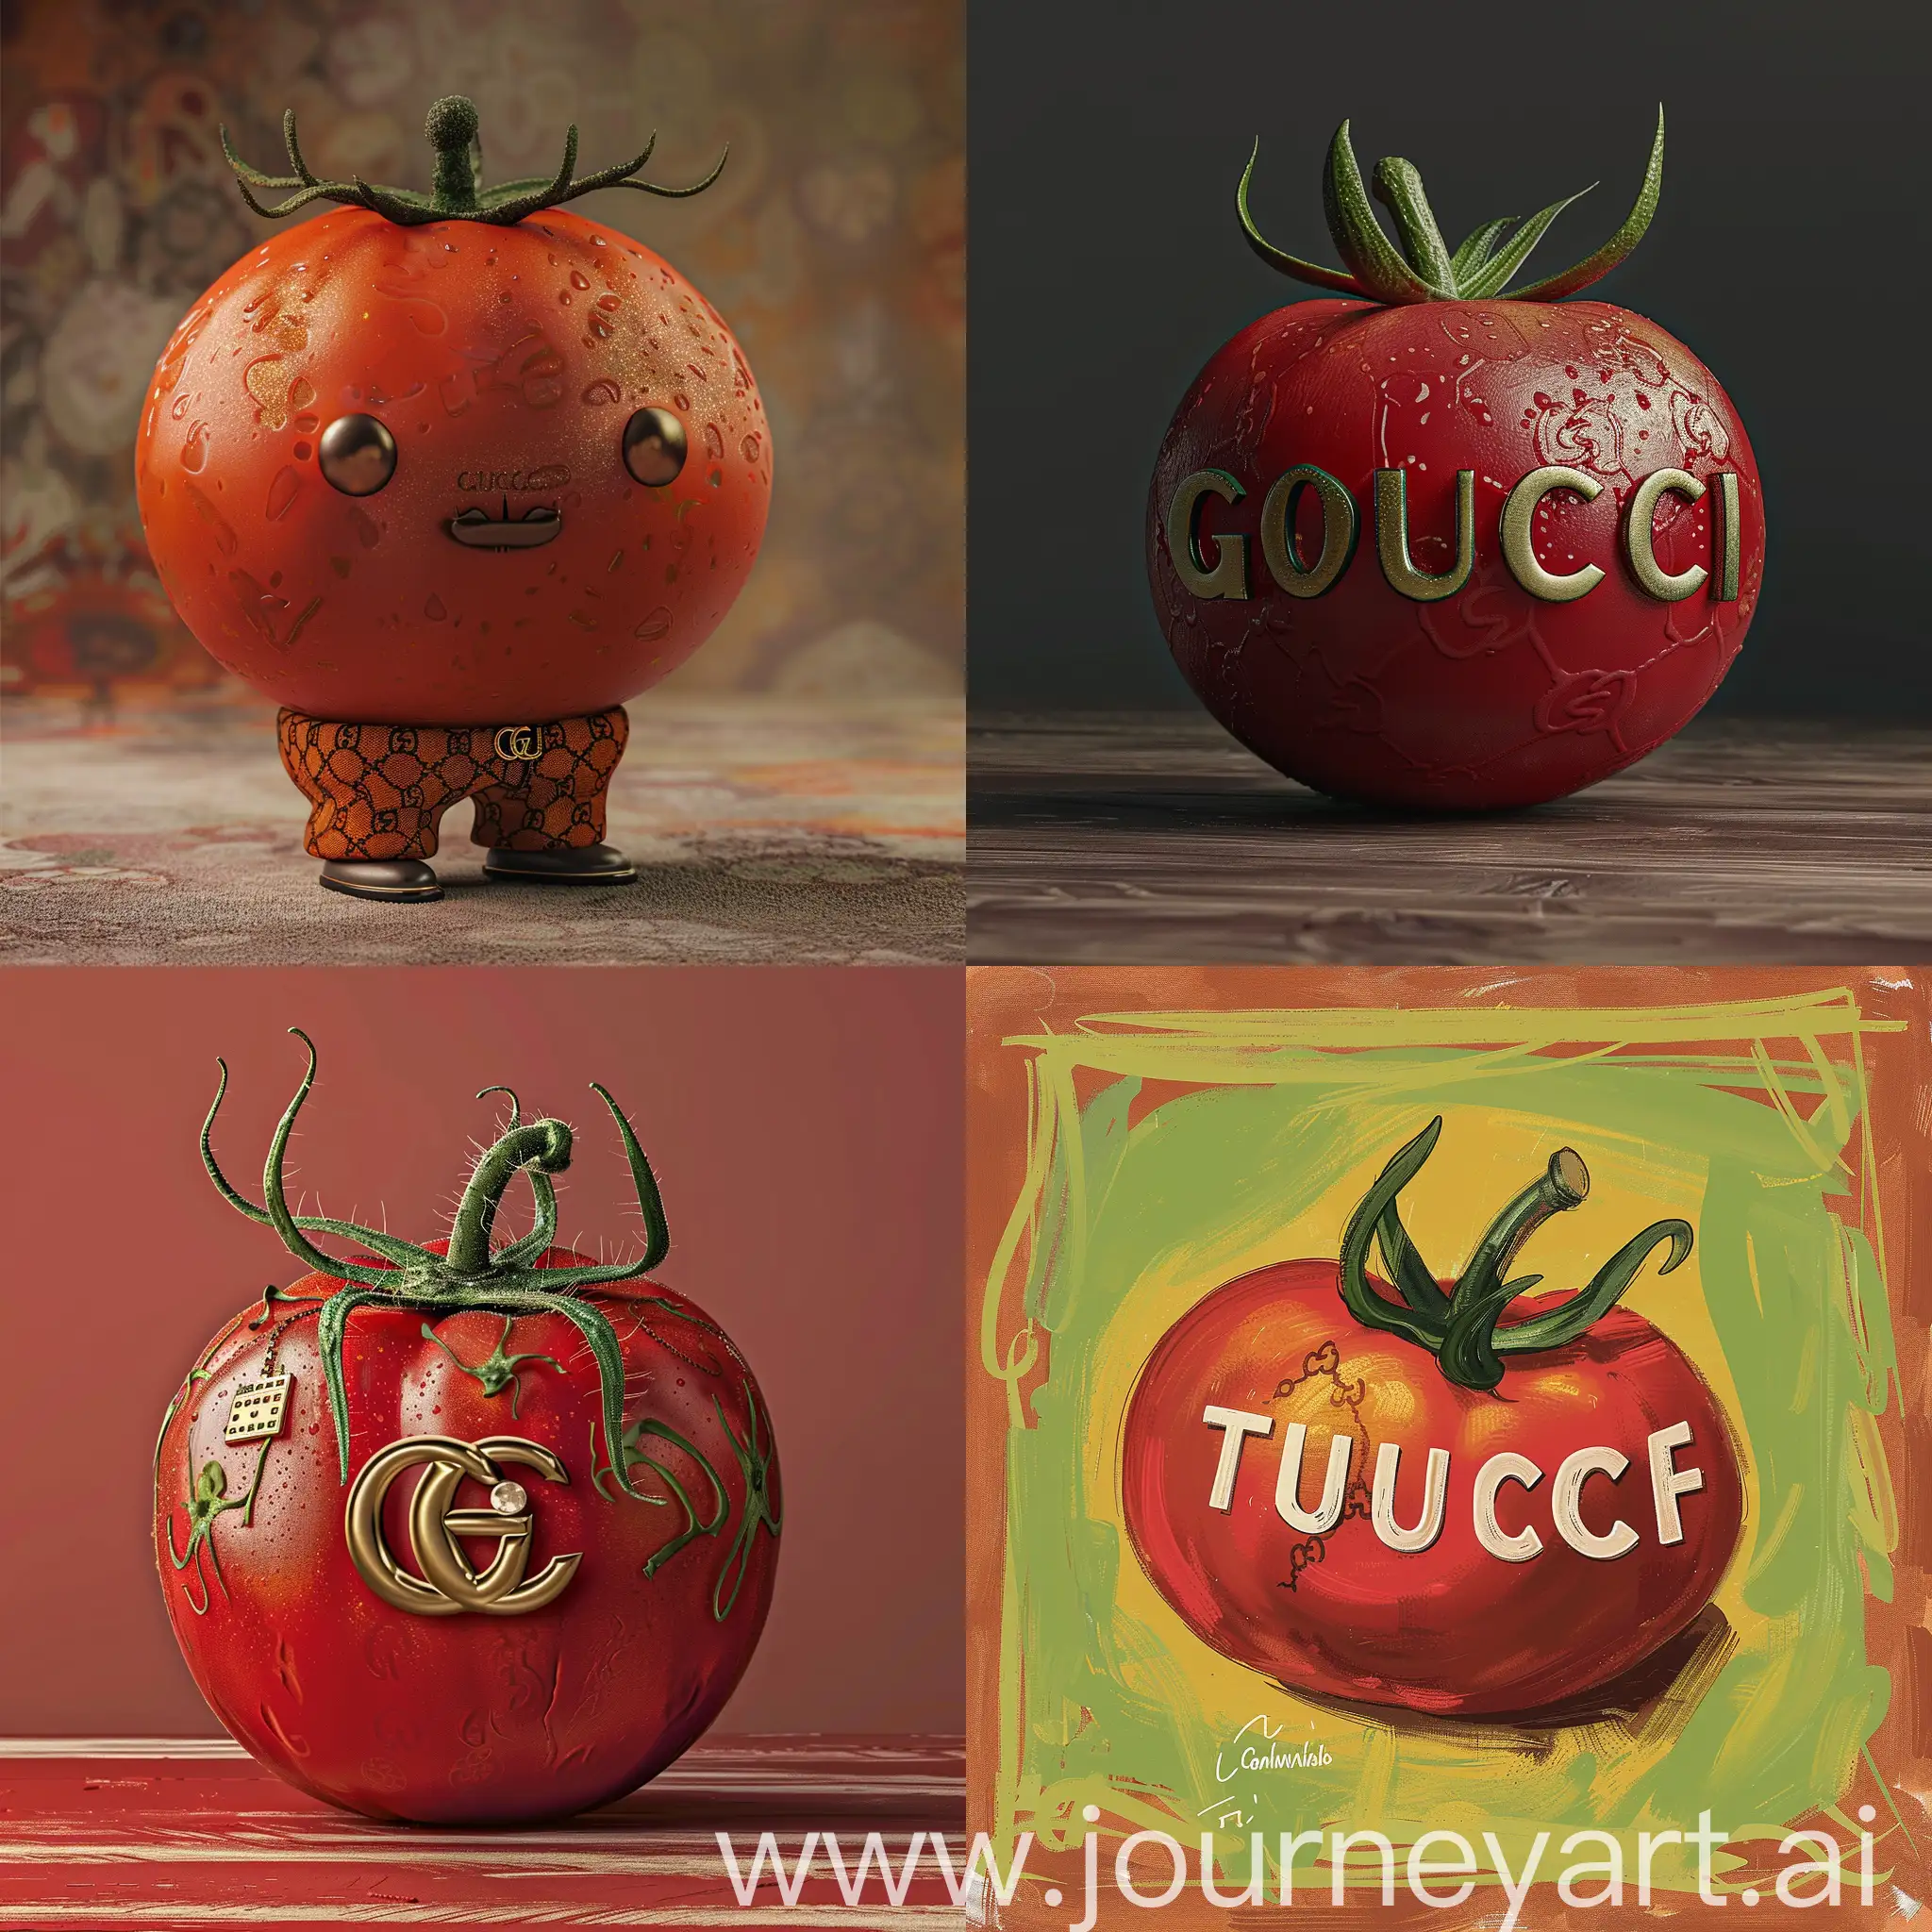 FashionForward-Tomato-Expressing-Identity-with-Gucci-Affection